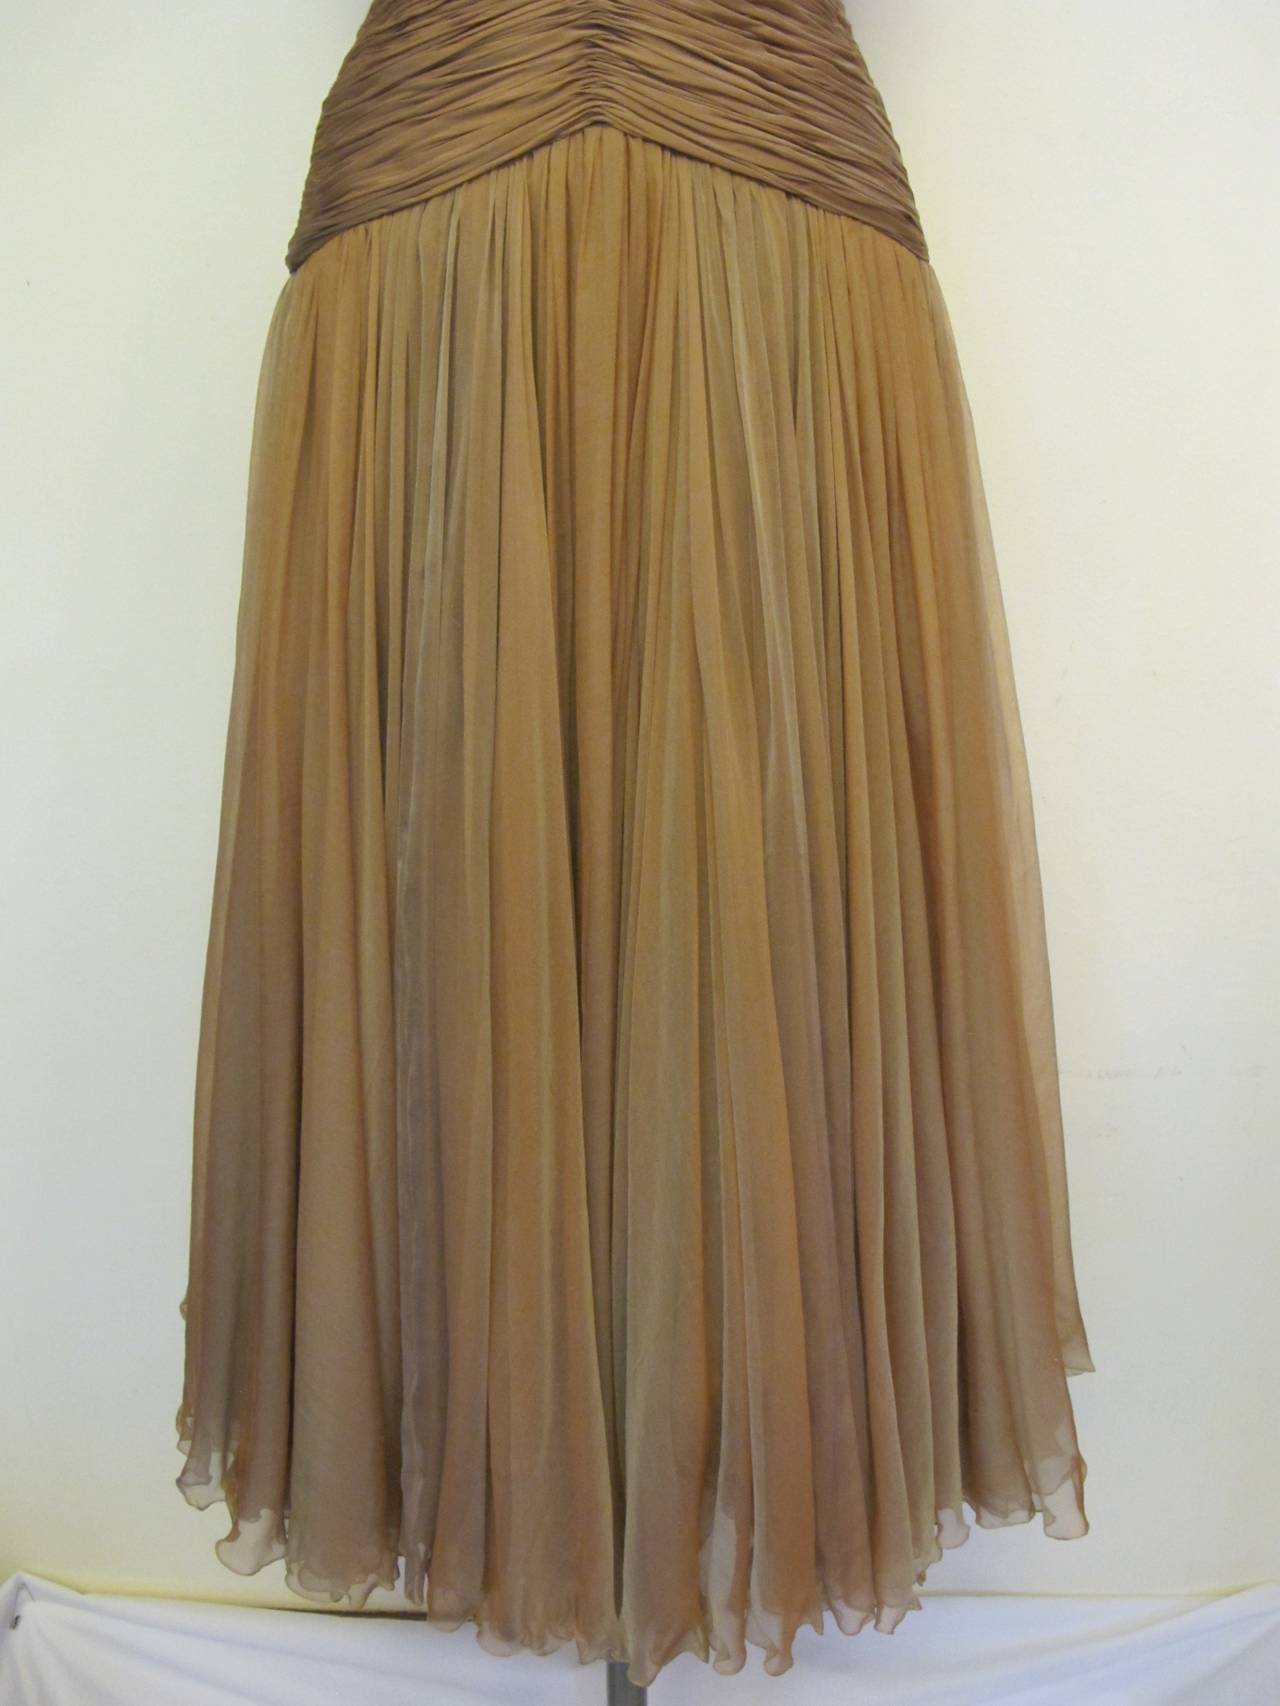 Gianni Versace Spring - Summer 2006 Runway Multi Shaded Caramel Gown For Sale 2